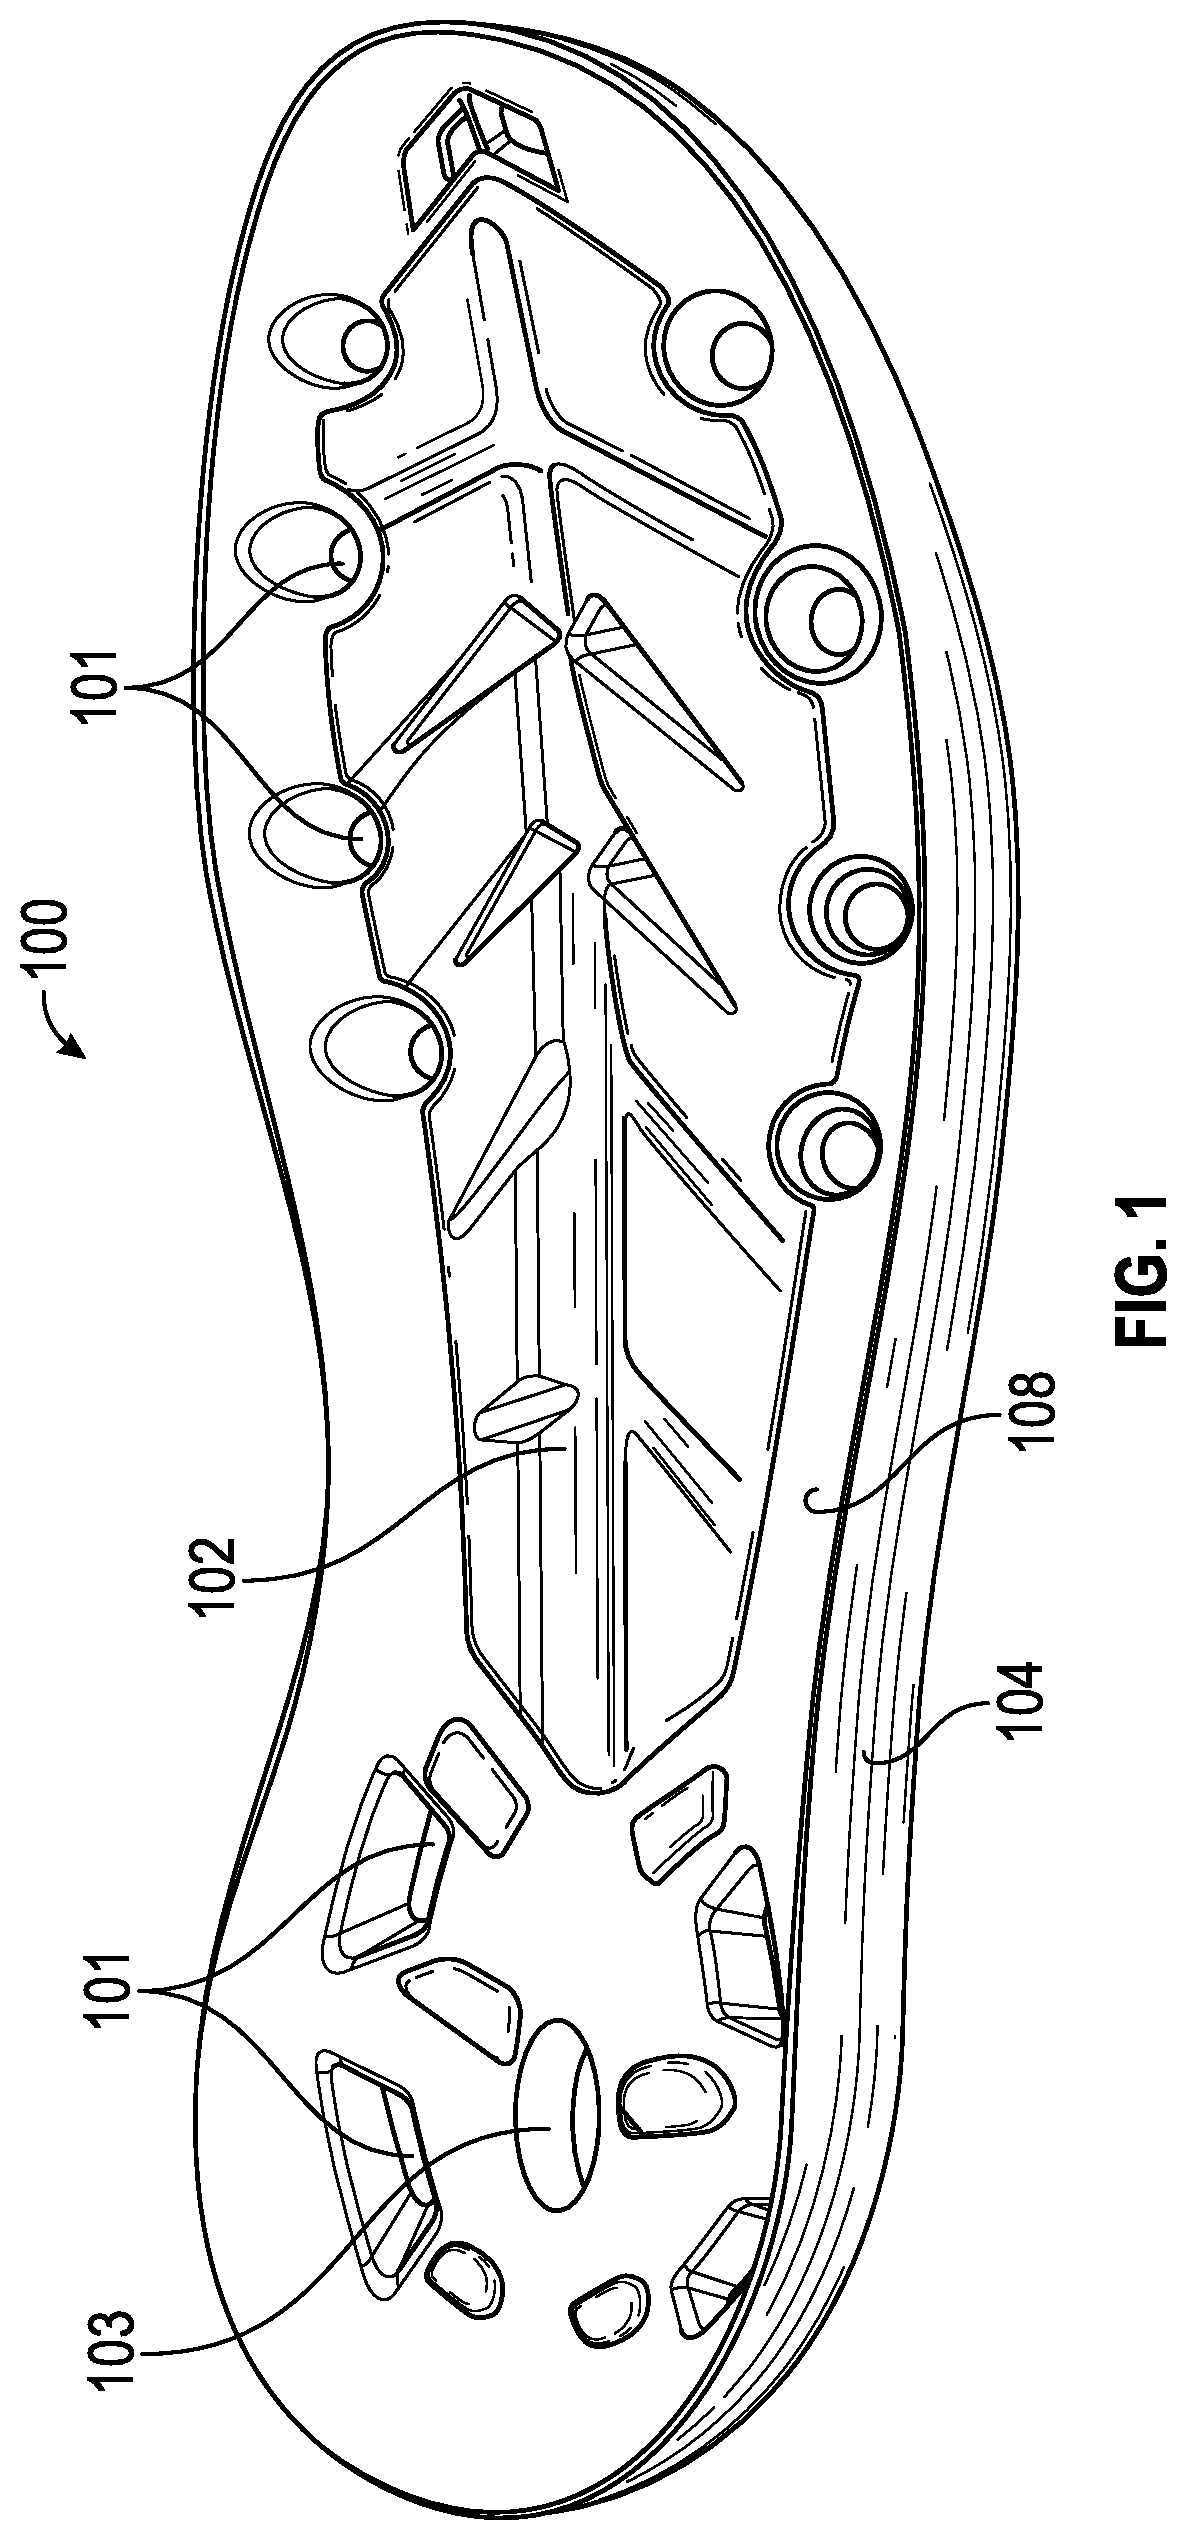 Protective cover for cleated athletic shoes